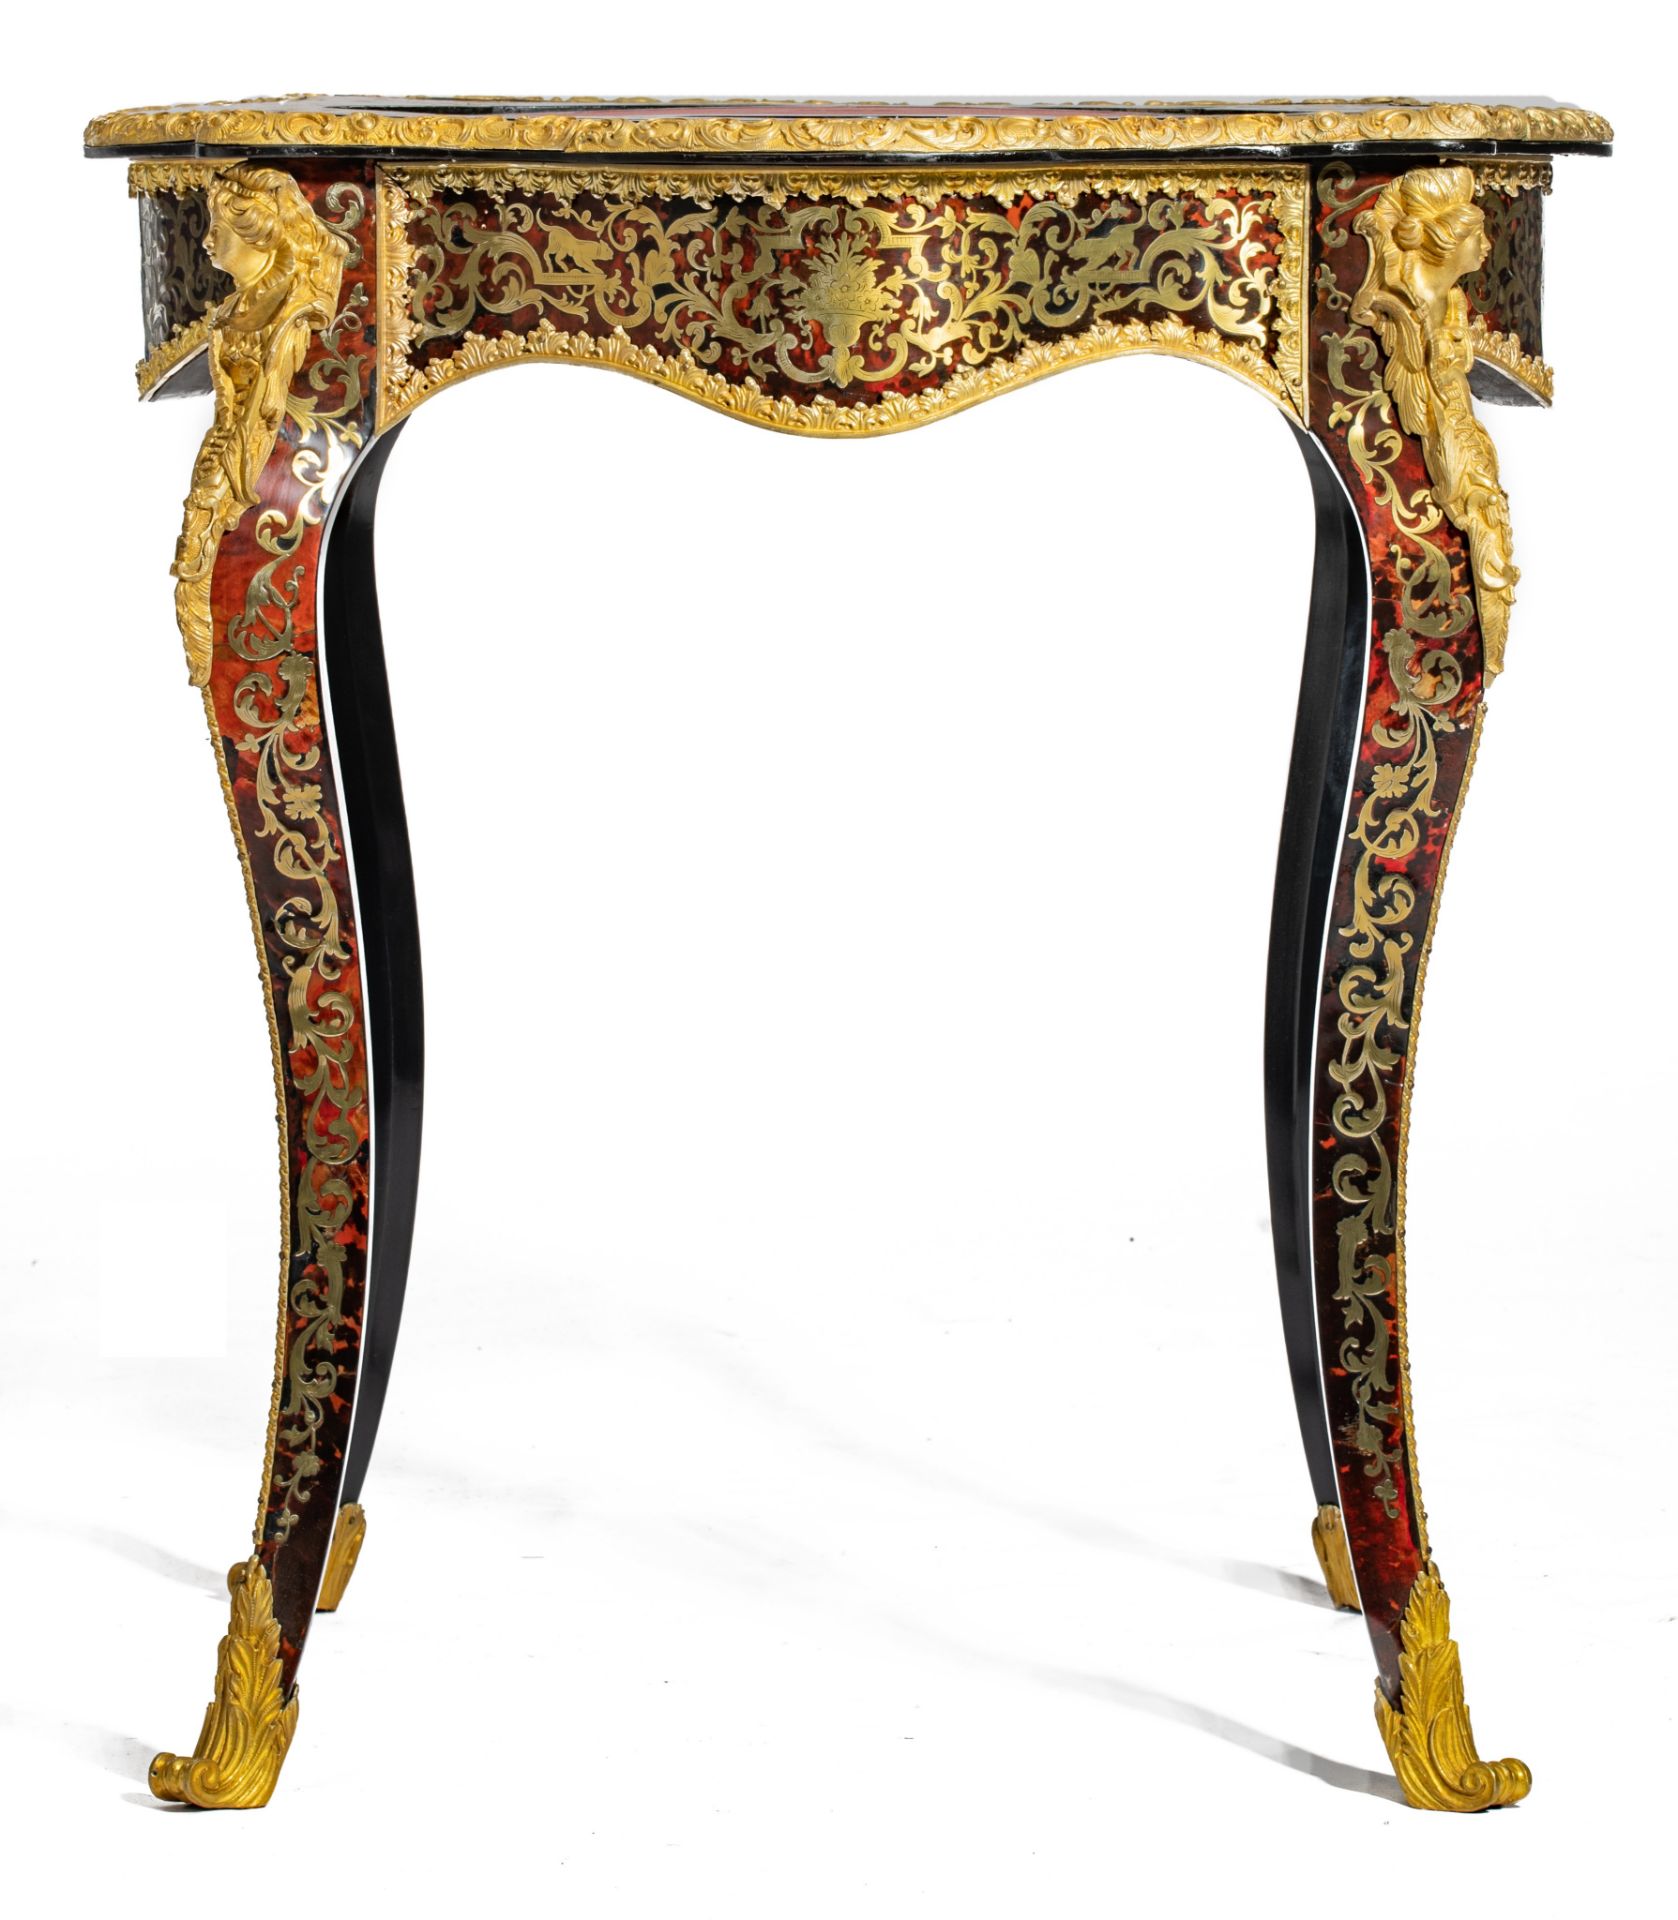 A fine Napoleon III Boulle work games table, with gilt bronze mounts and a red leather inlaid playin - Image 2 of 11